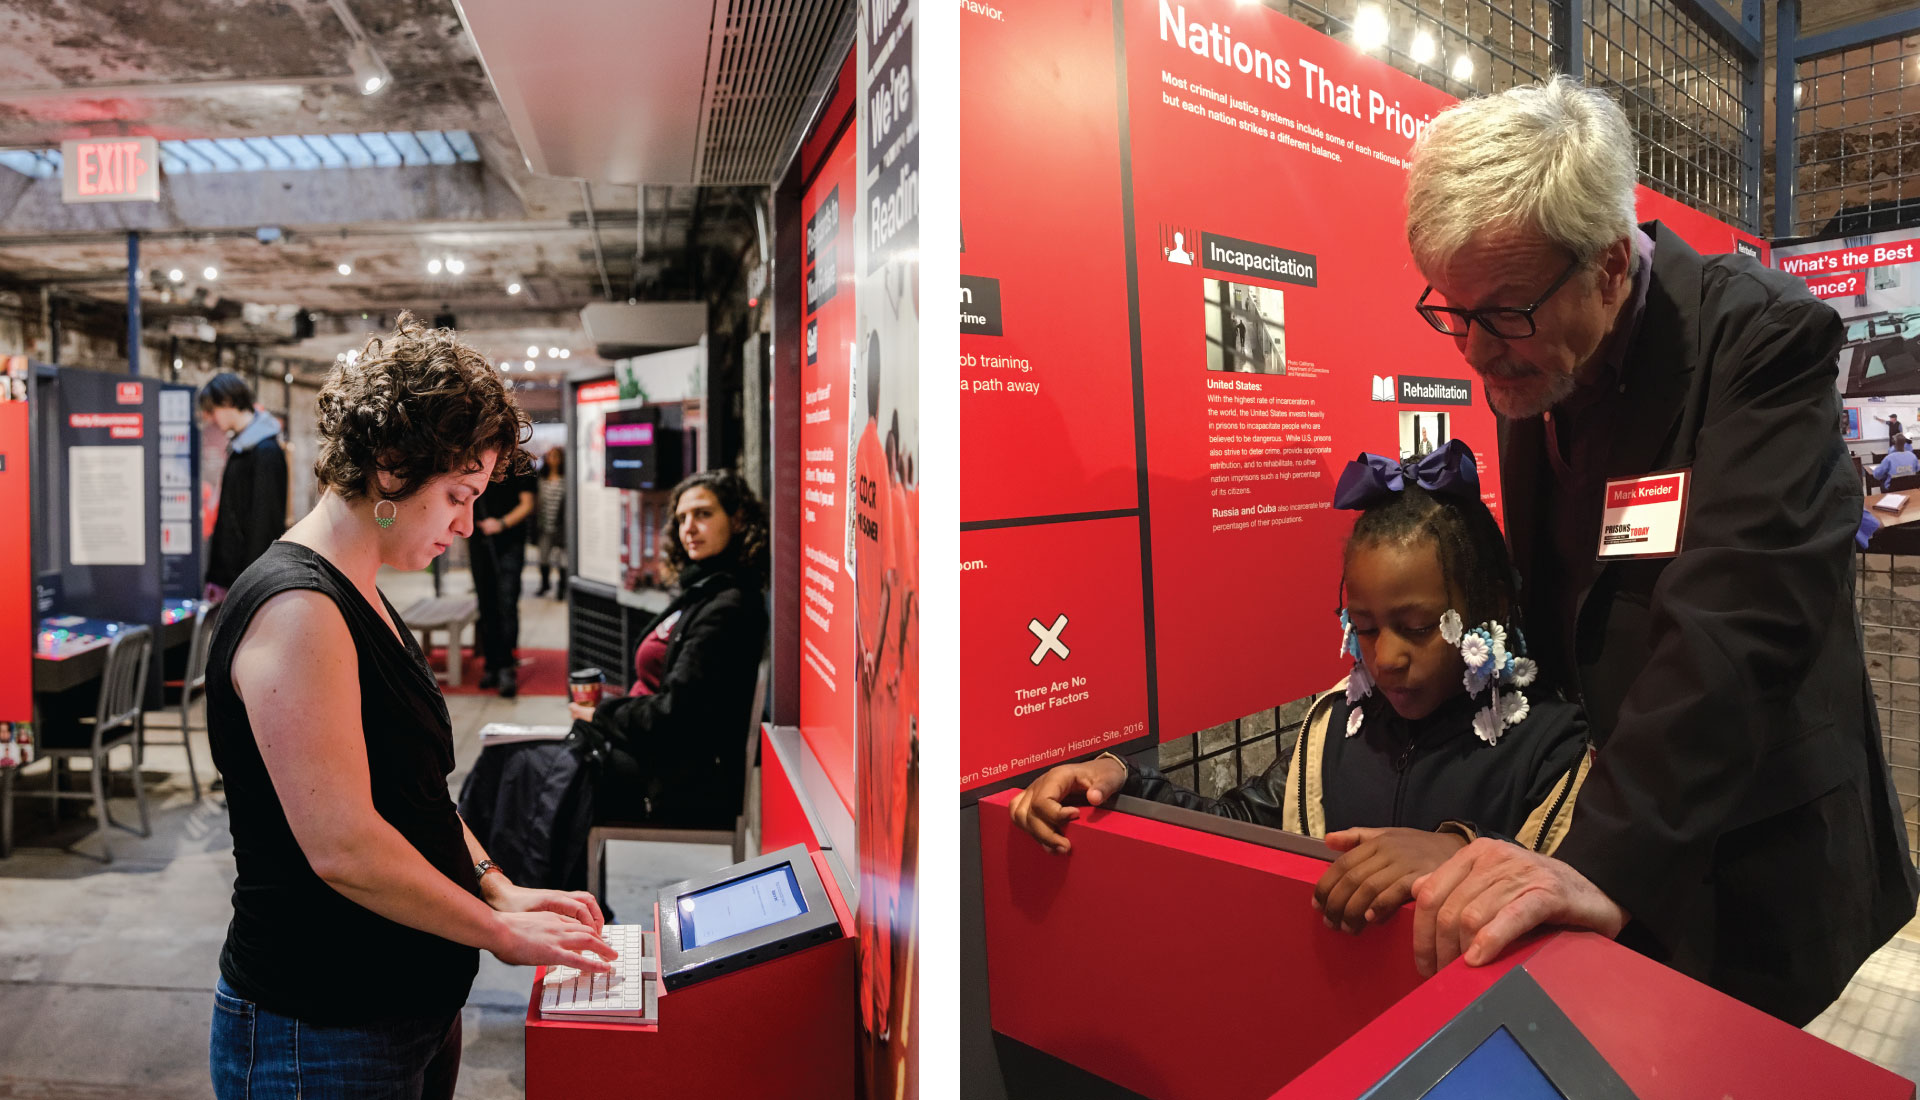 Two images, side by side. On the left, a woman filling out her digital postcard on a touch screen. On the right, a young girl and older man work together to learn about the prison system on a touch screen, out of view. 